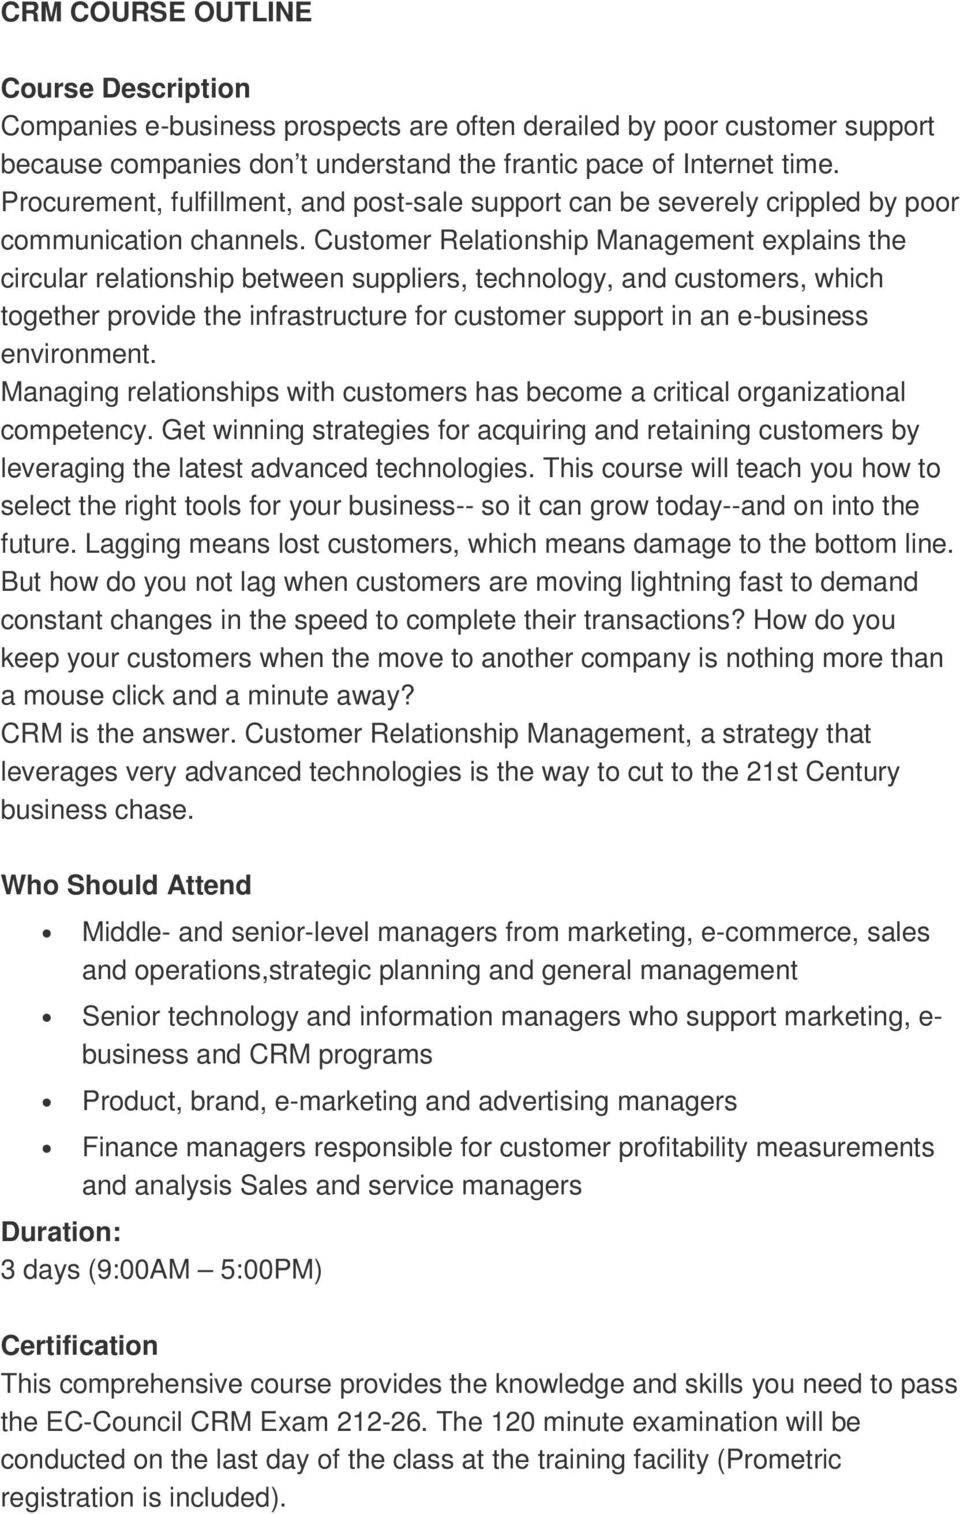 Customer Relationship Management explains the circular relationship between suppliers, technology, and customers, which together provide the infrastructure for customer support in an e-business